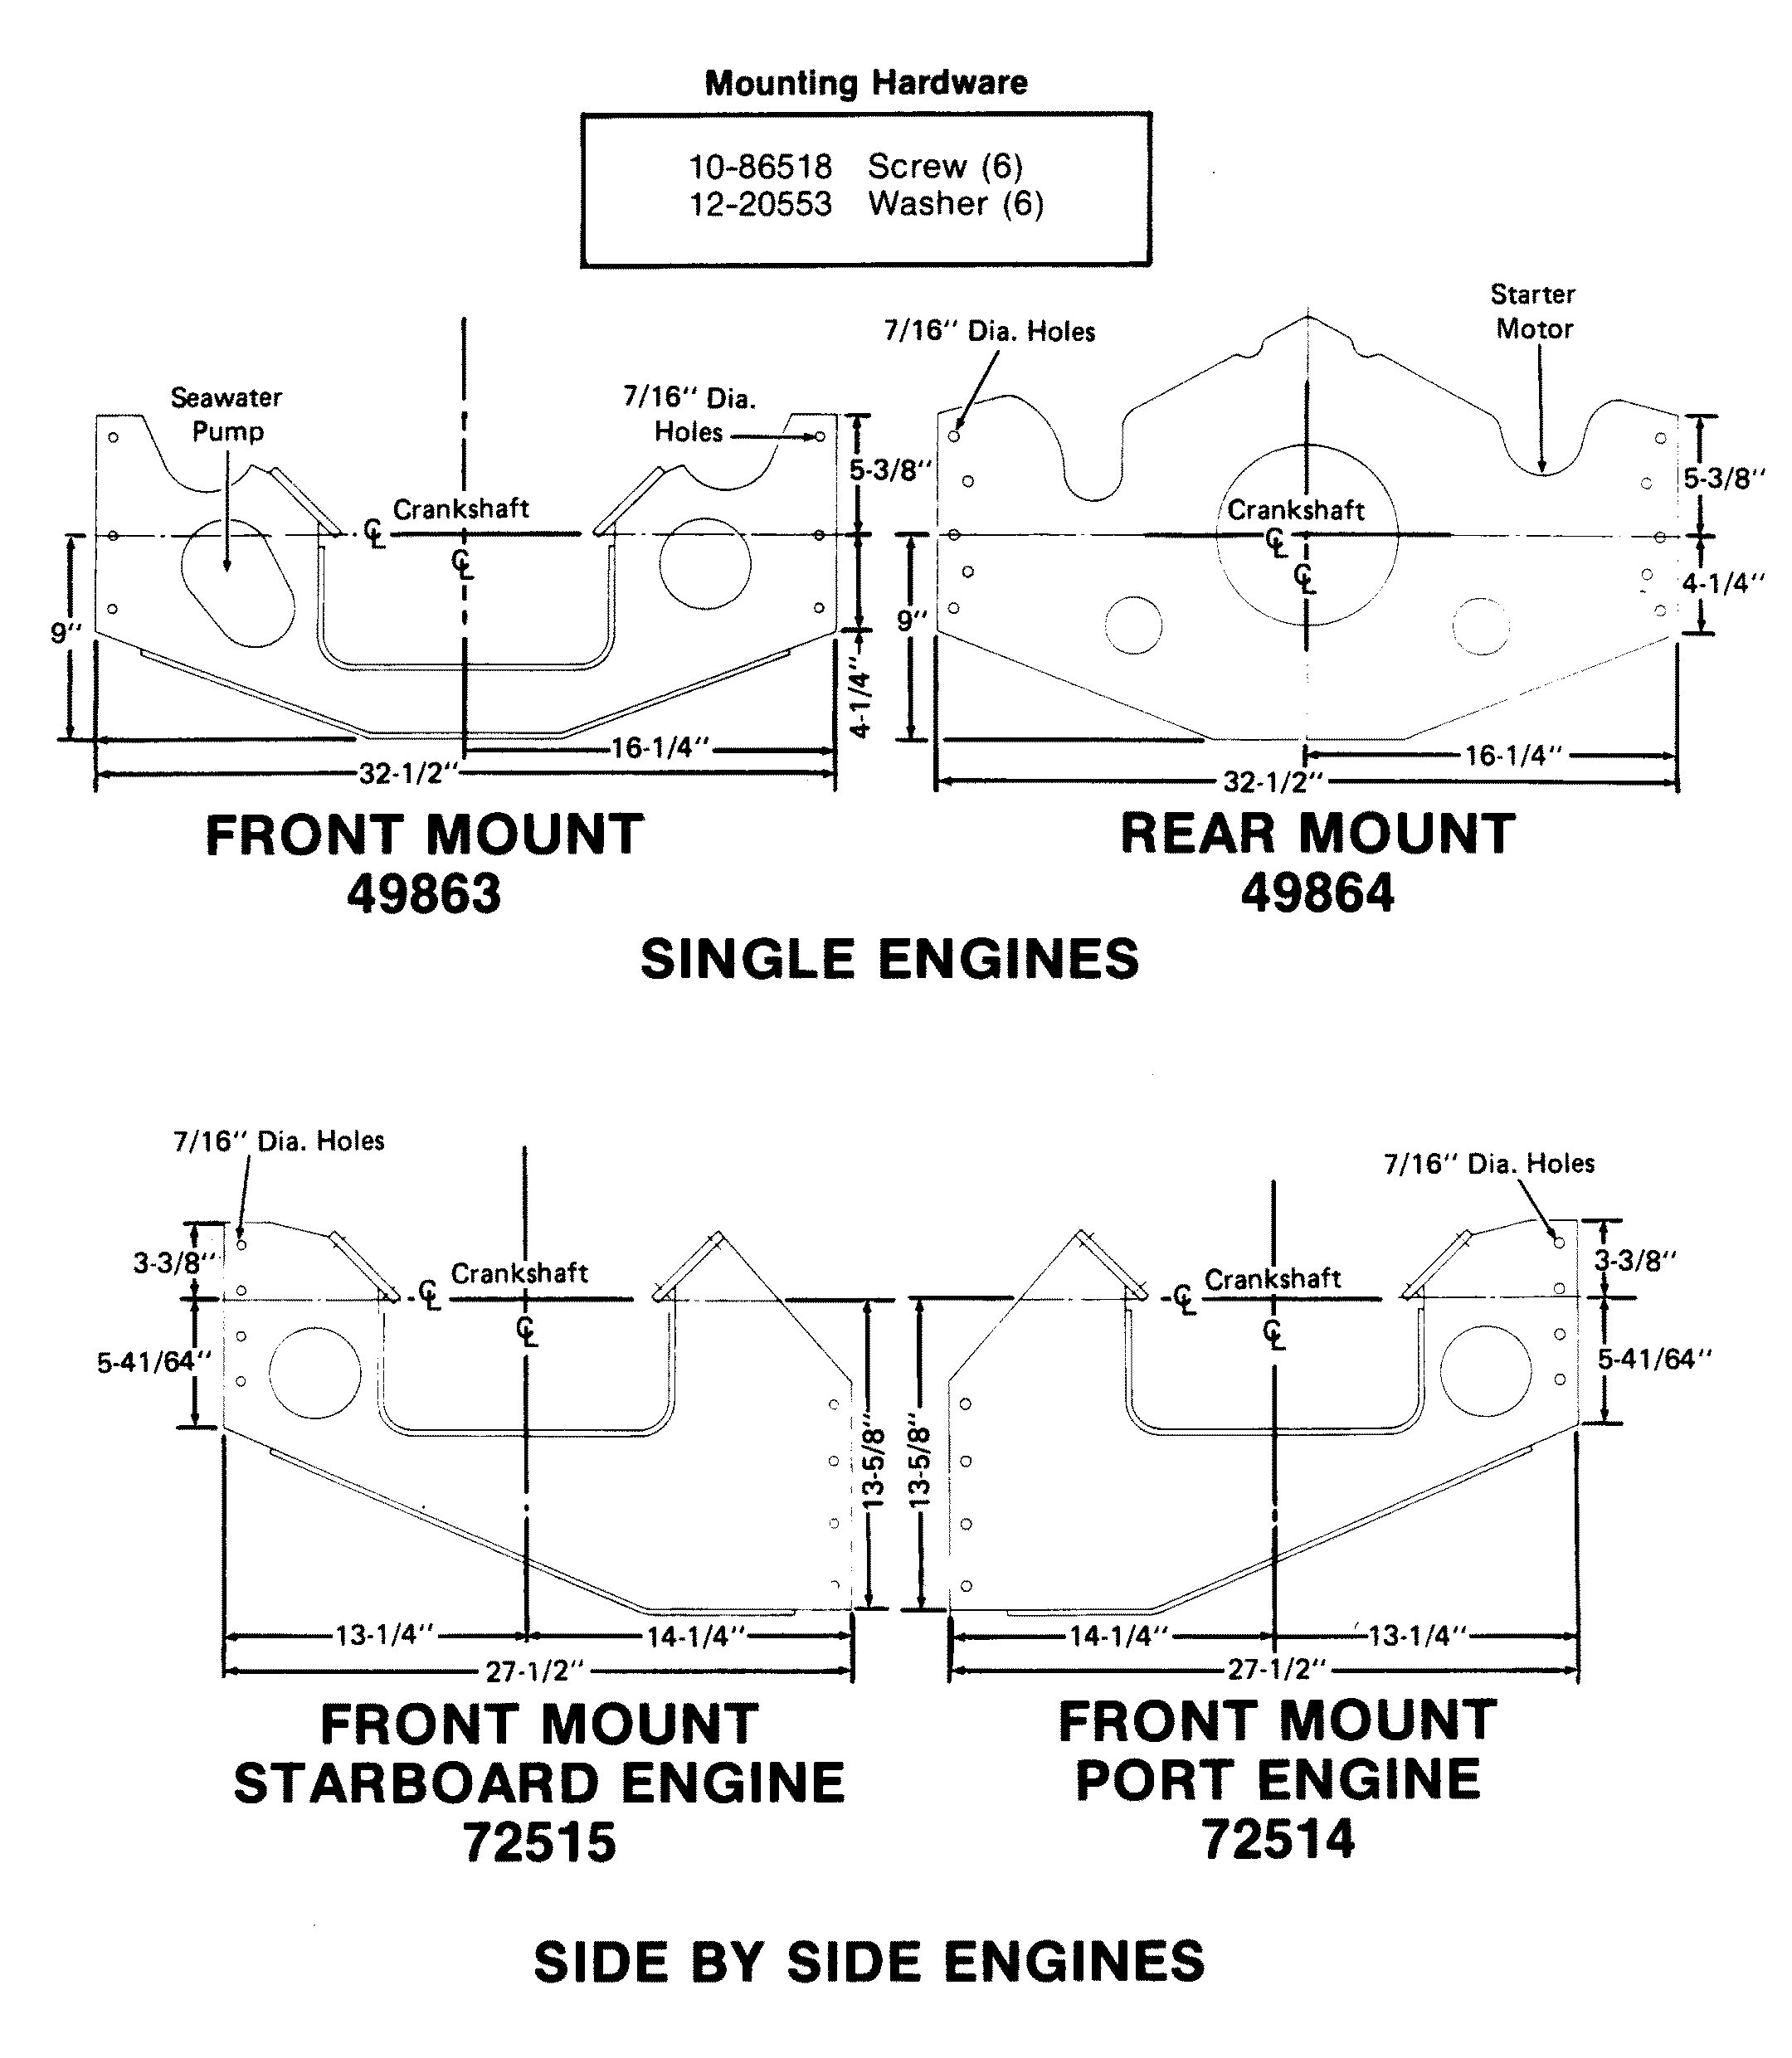 MOUNTING PLATES (SIDE BY SIDE ENGINES)